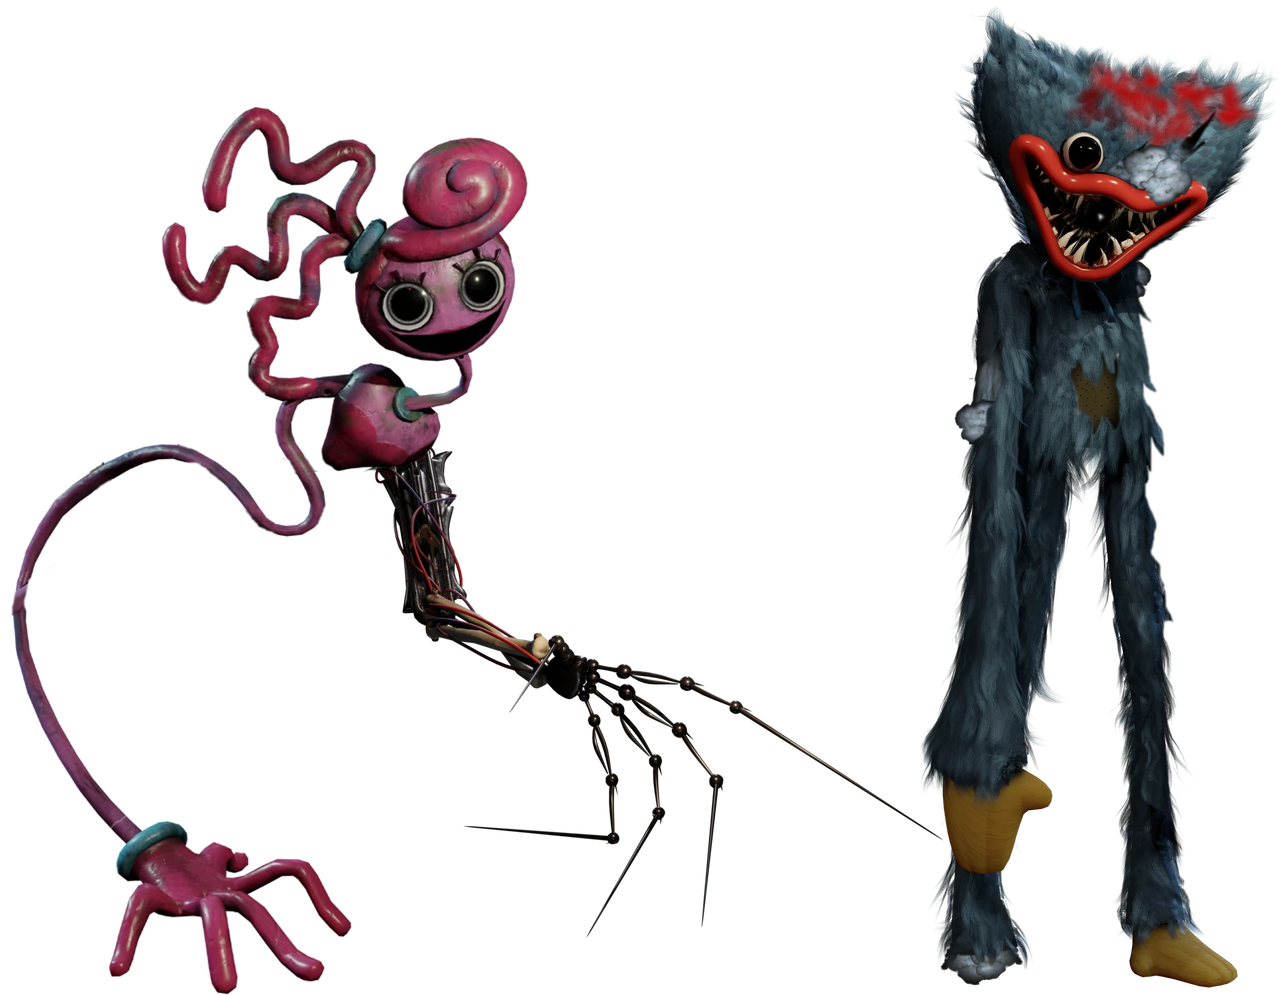 Damaged Huggy Wuggy and Mommy Long Legs by BlueBearStudios07 on